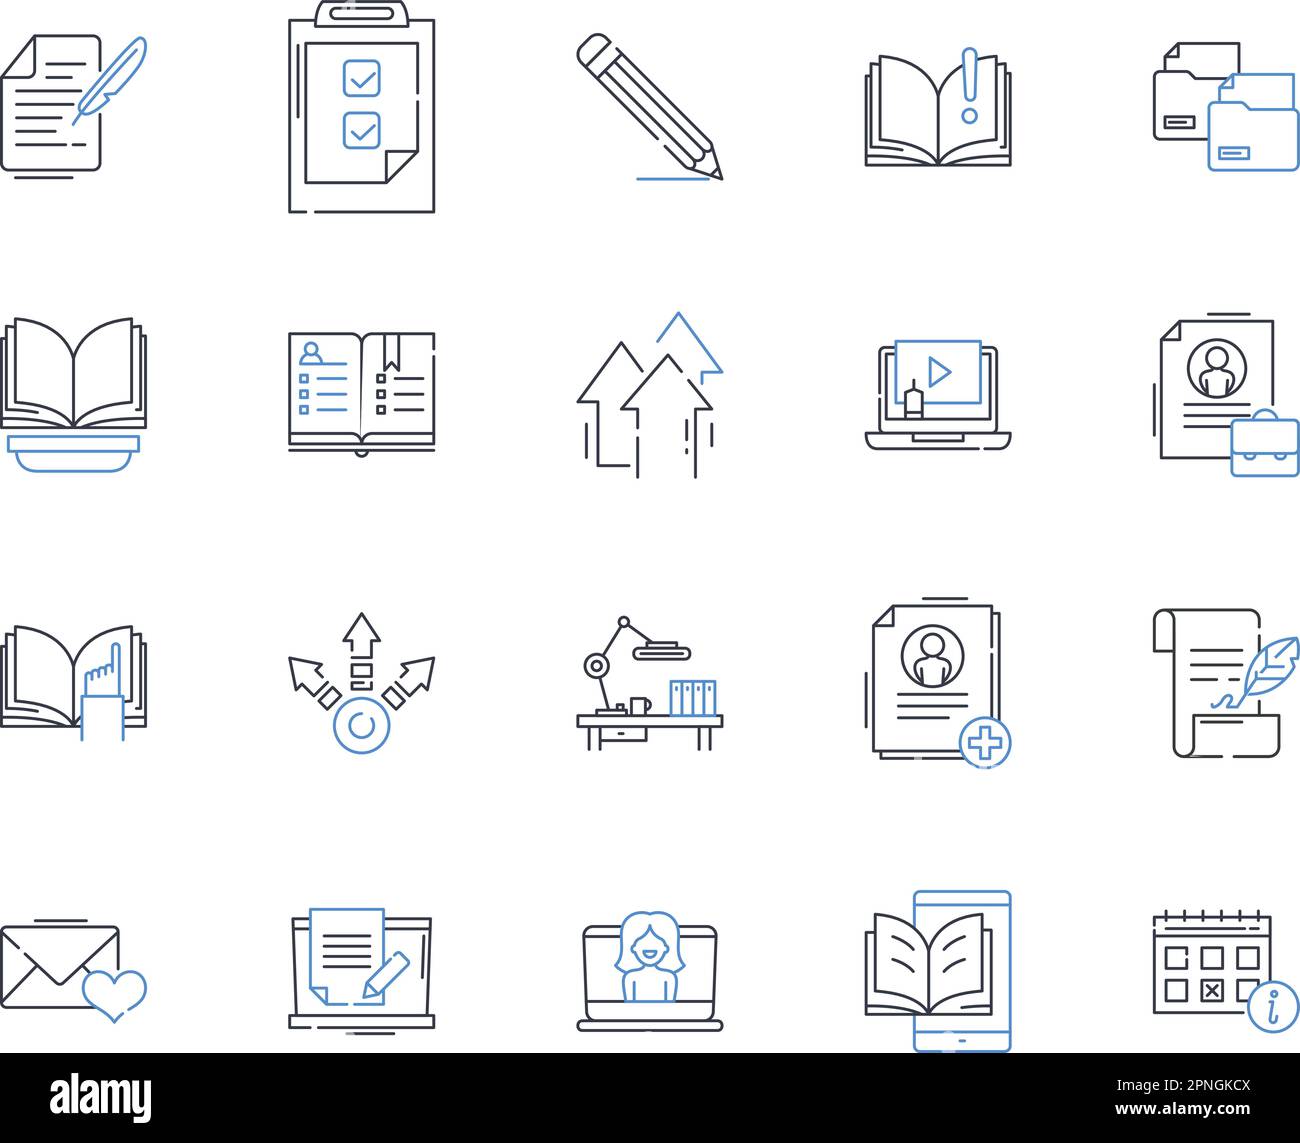 Market strategy line icons collection. Targeting, Positioning, Differentiation, Branding, Segmentation, Advertising, Promotion vector and linear Stock Vector